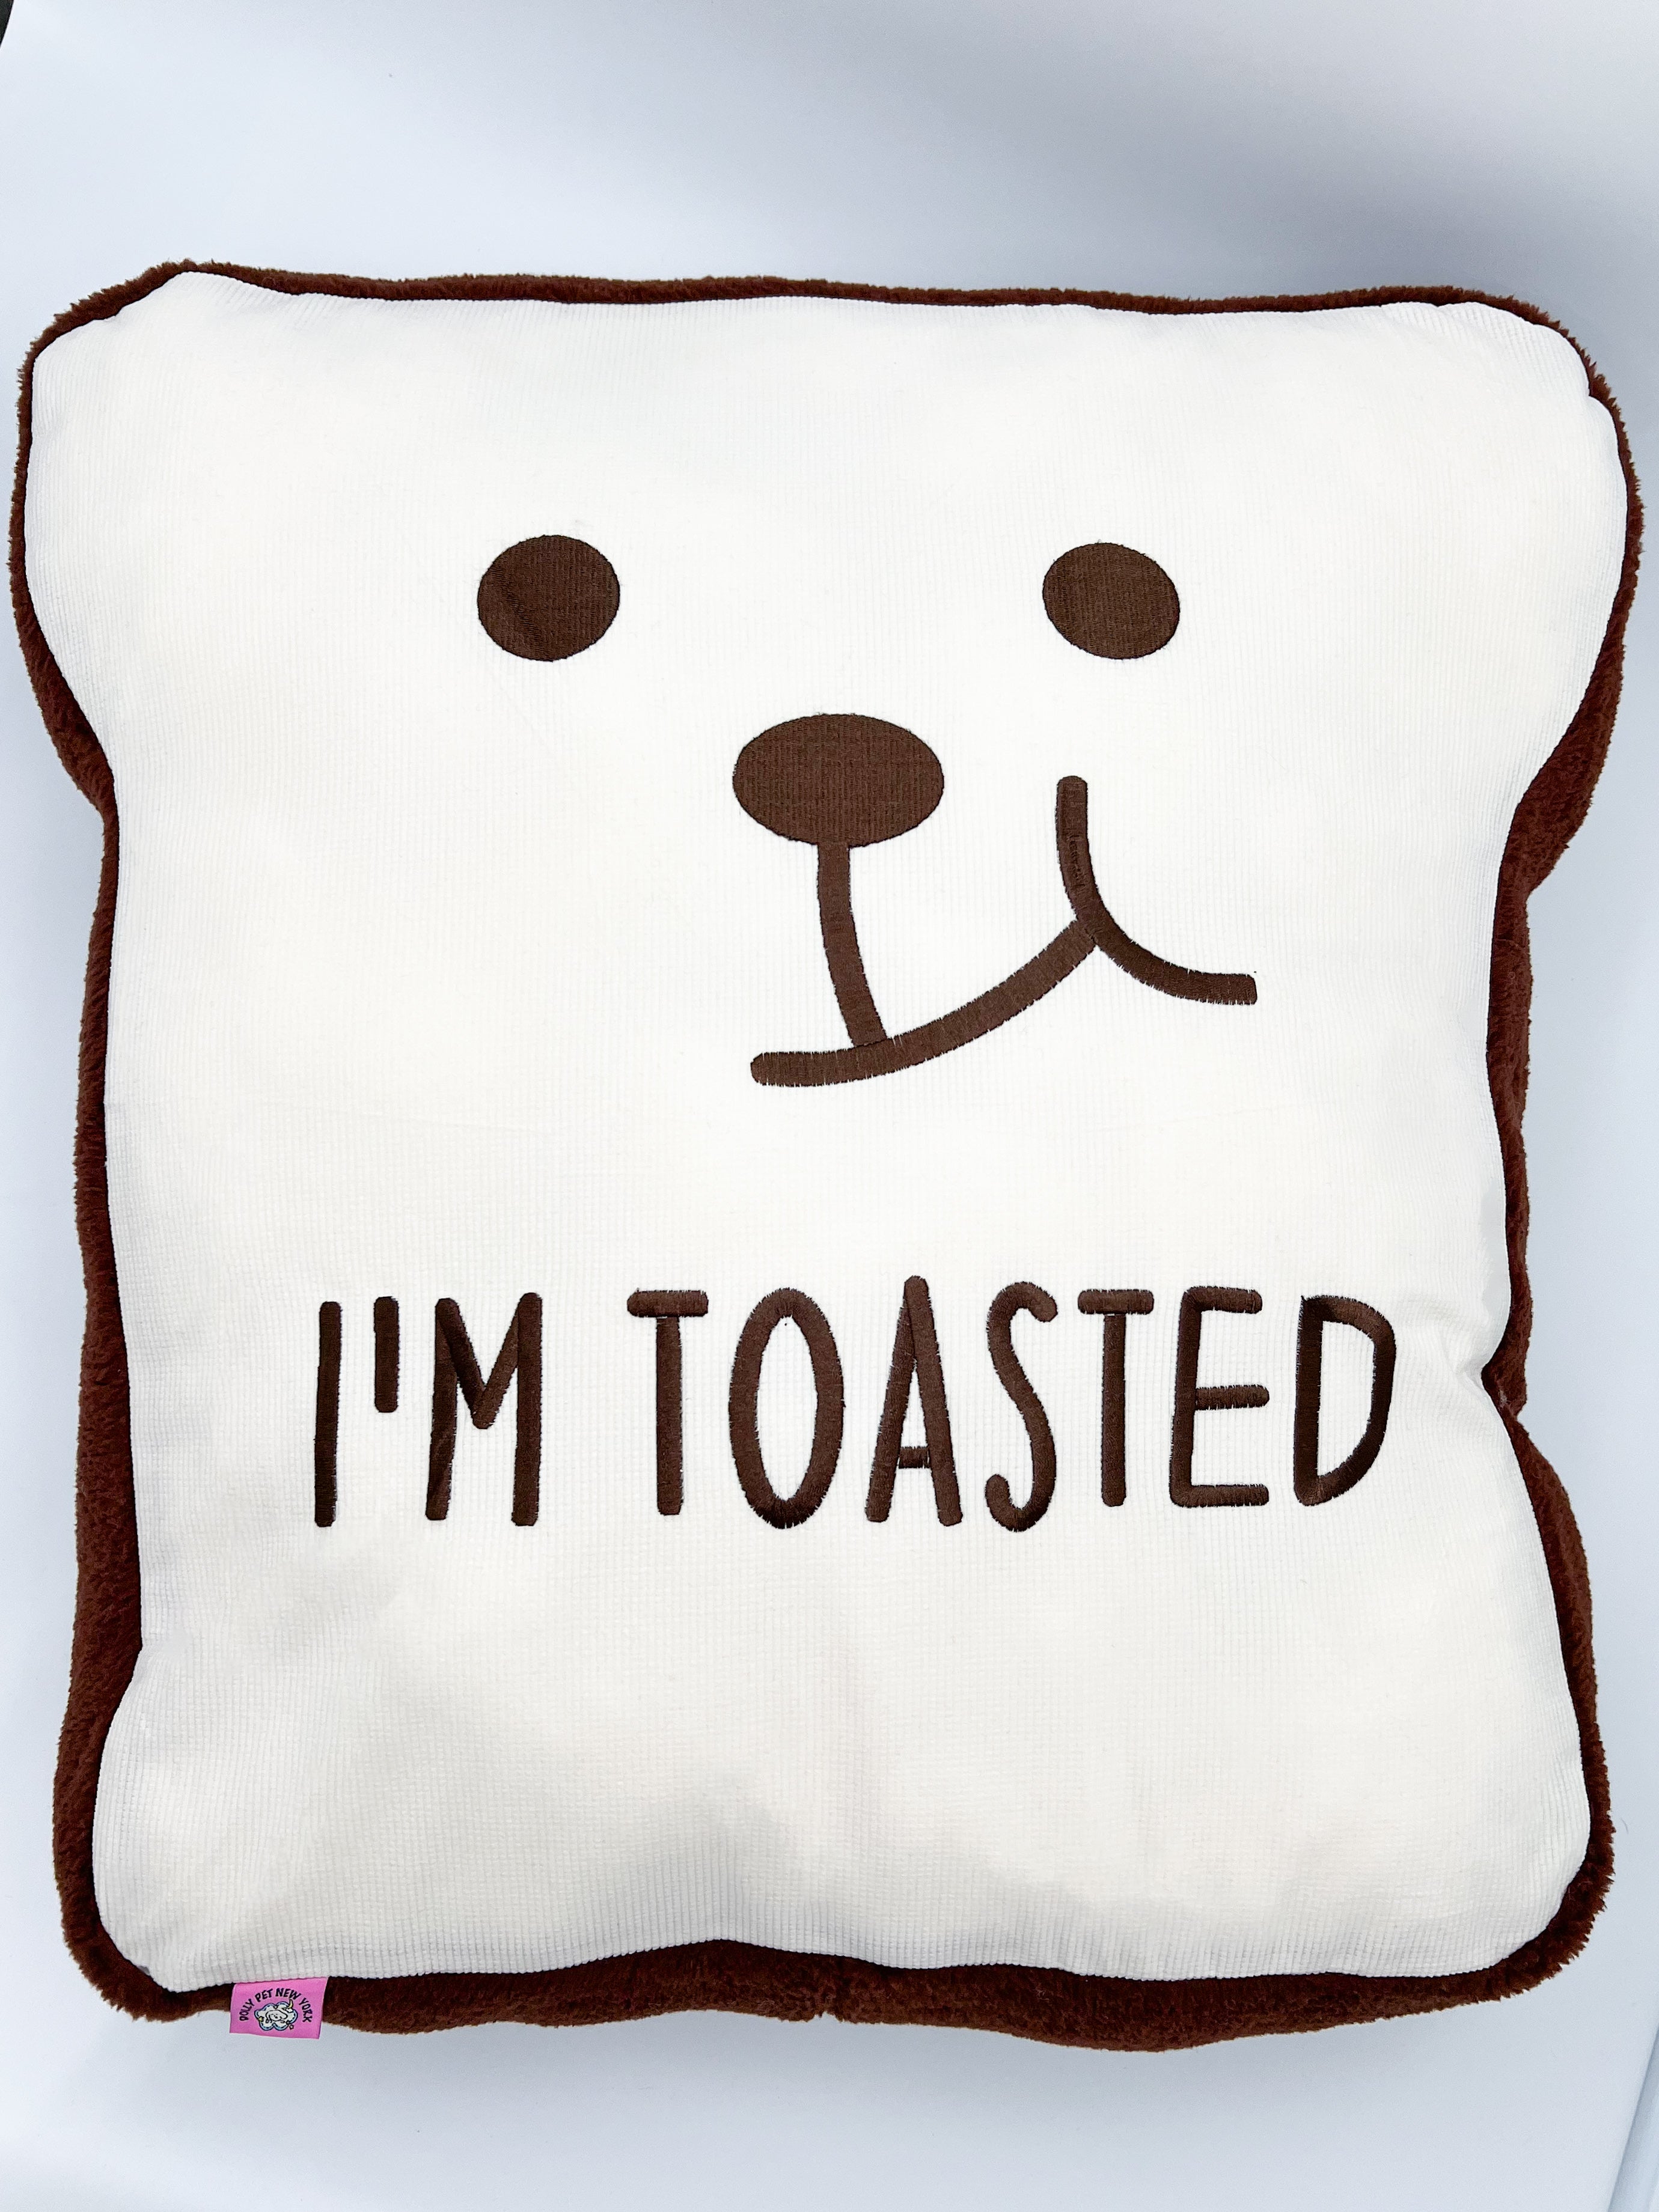 Toasted me sleeping bed